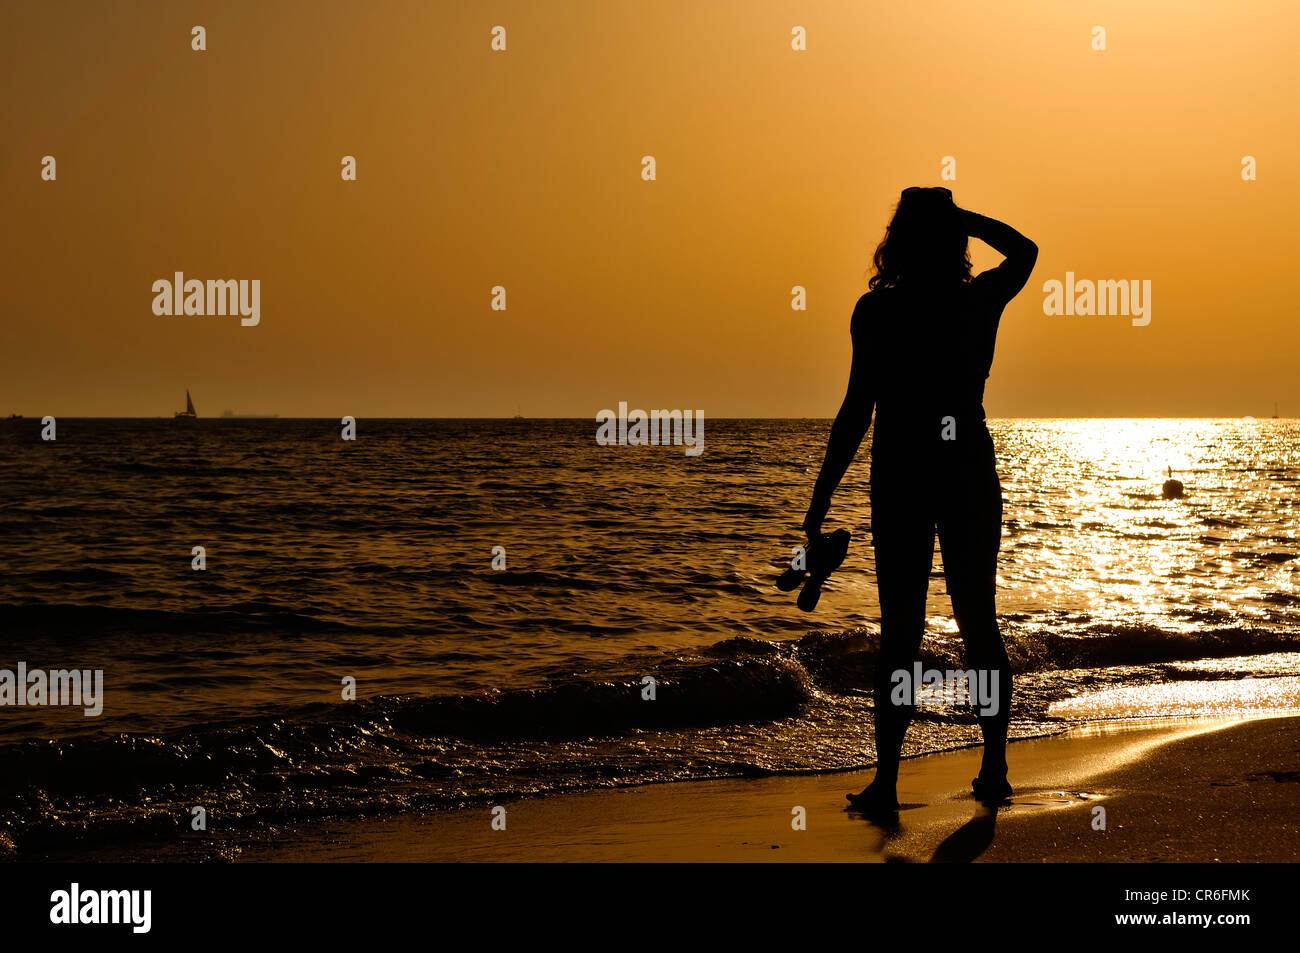 Woman standing on the beach looking out to the sea, evening mood, Lido di Ostia, Rome, Lazio region, Italy, Europe Stock Photo